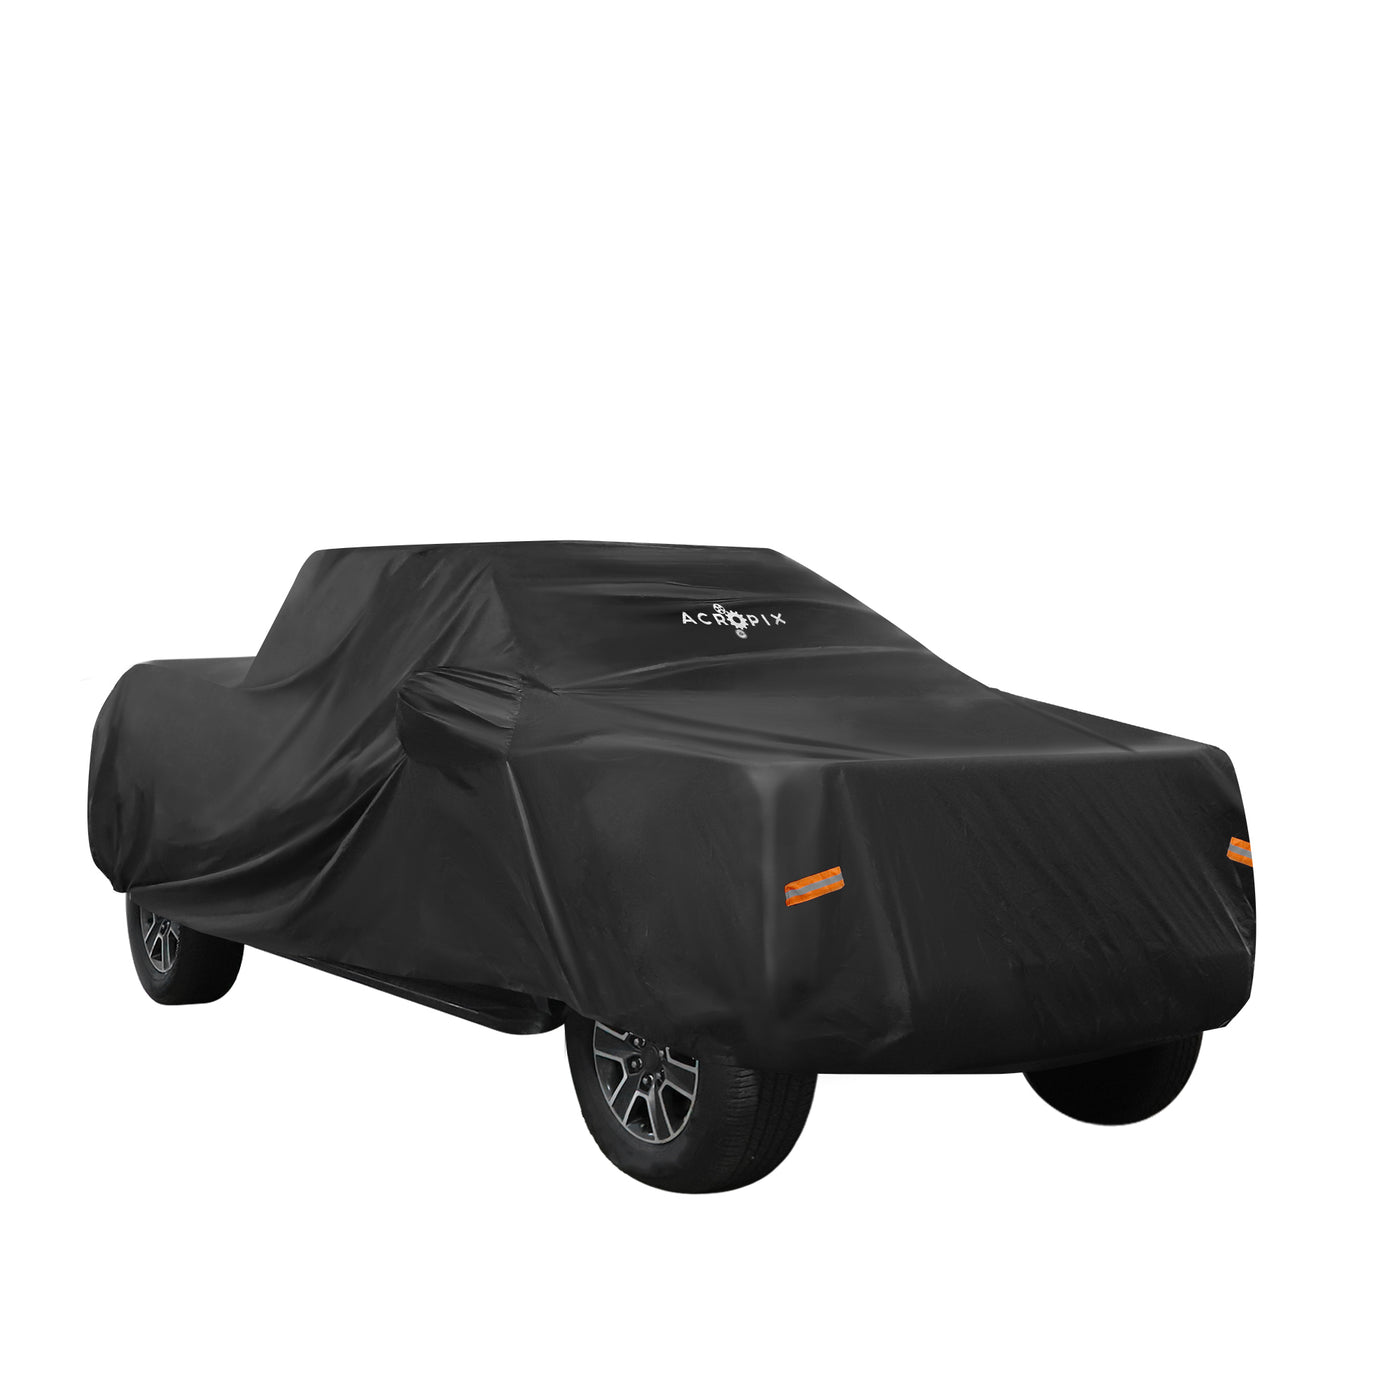 ACROPIX Pickup Truck Car Cover Fit for Toyota Tacoma Double Cab 4 Door 6.1 Feet Bed - Pack of 1 Black